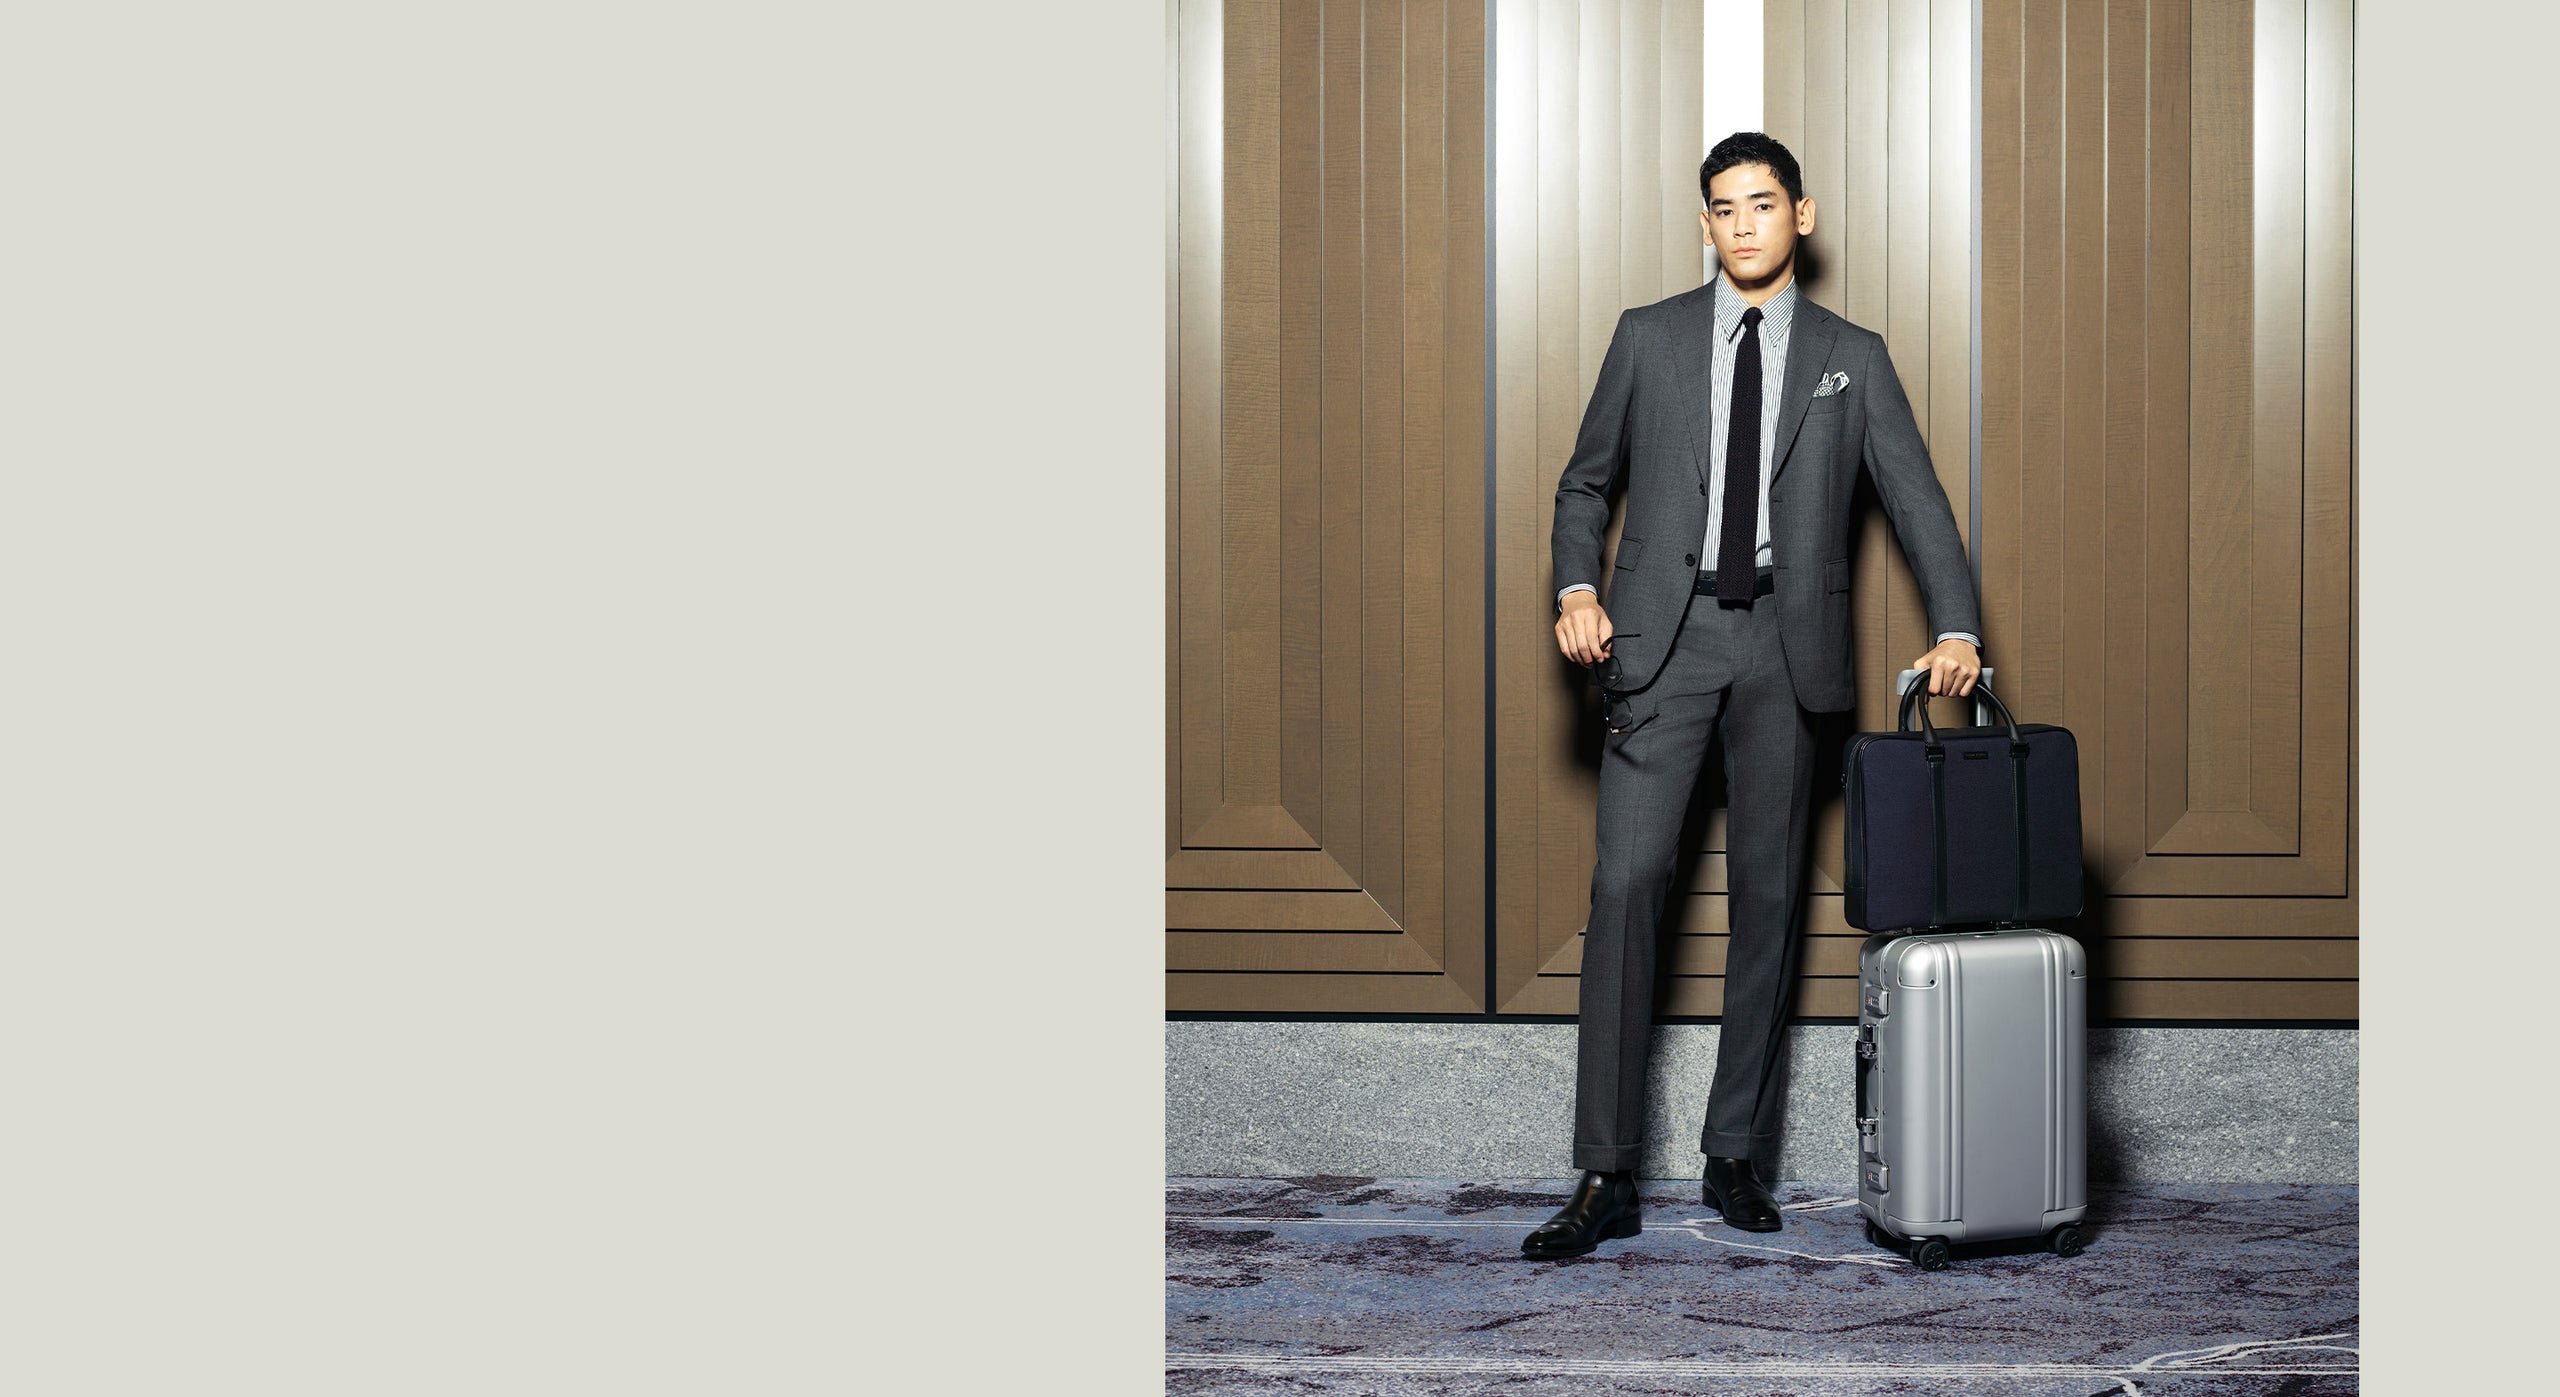 Suitcases - Buy Suitcases at Best Price in Nepal